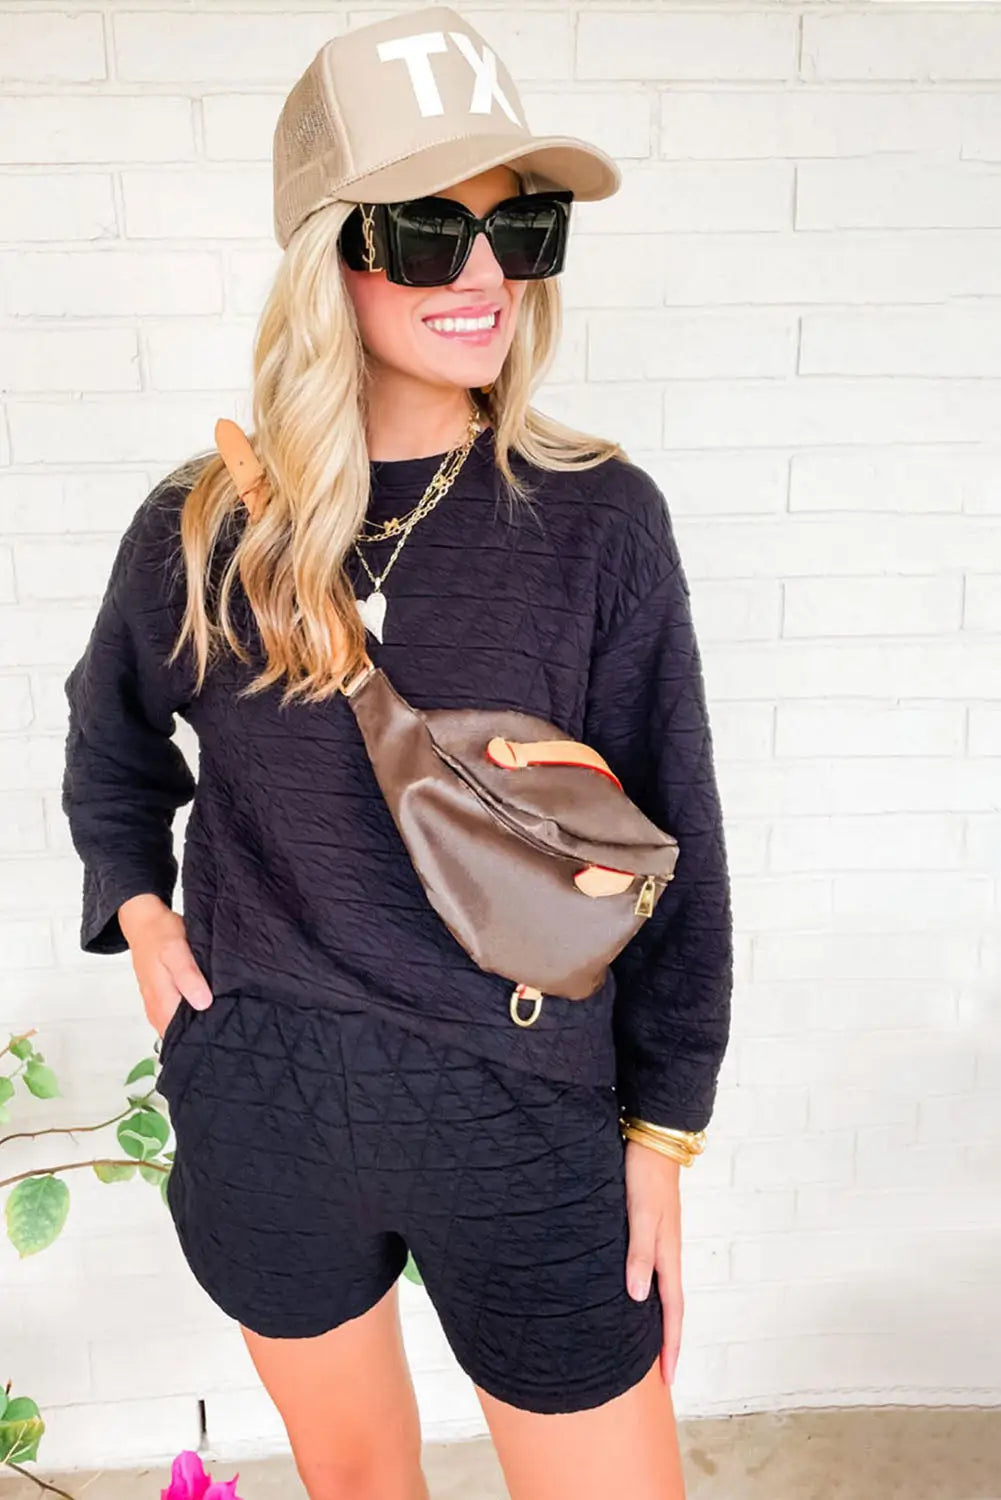 Black textured long sleeve top shorts outfit - loungewear